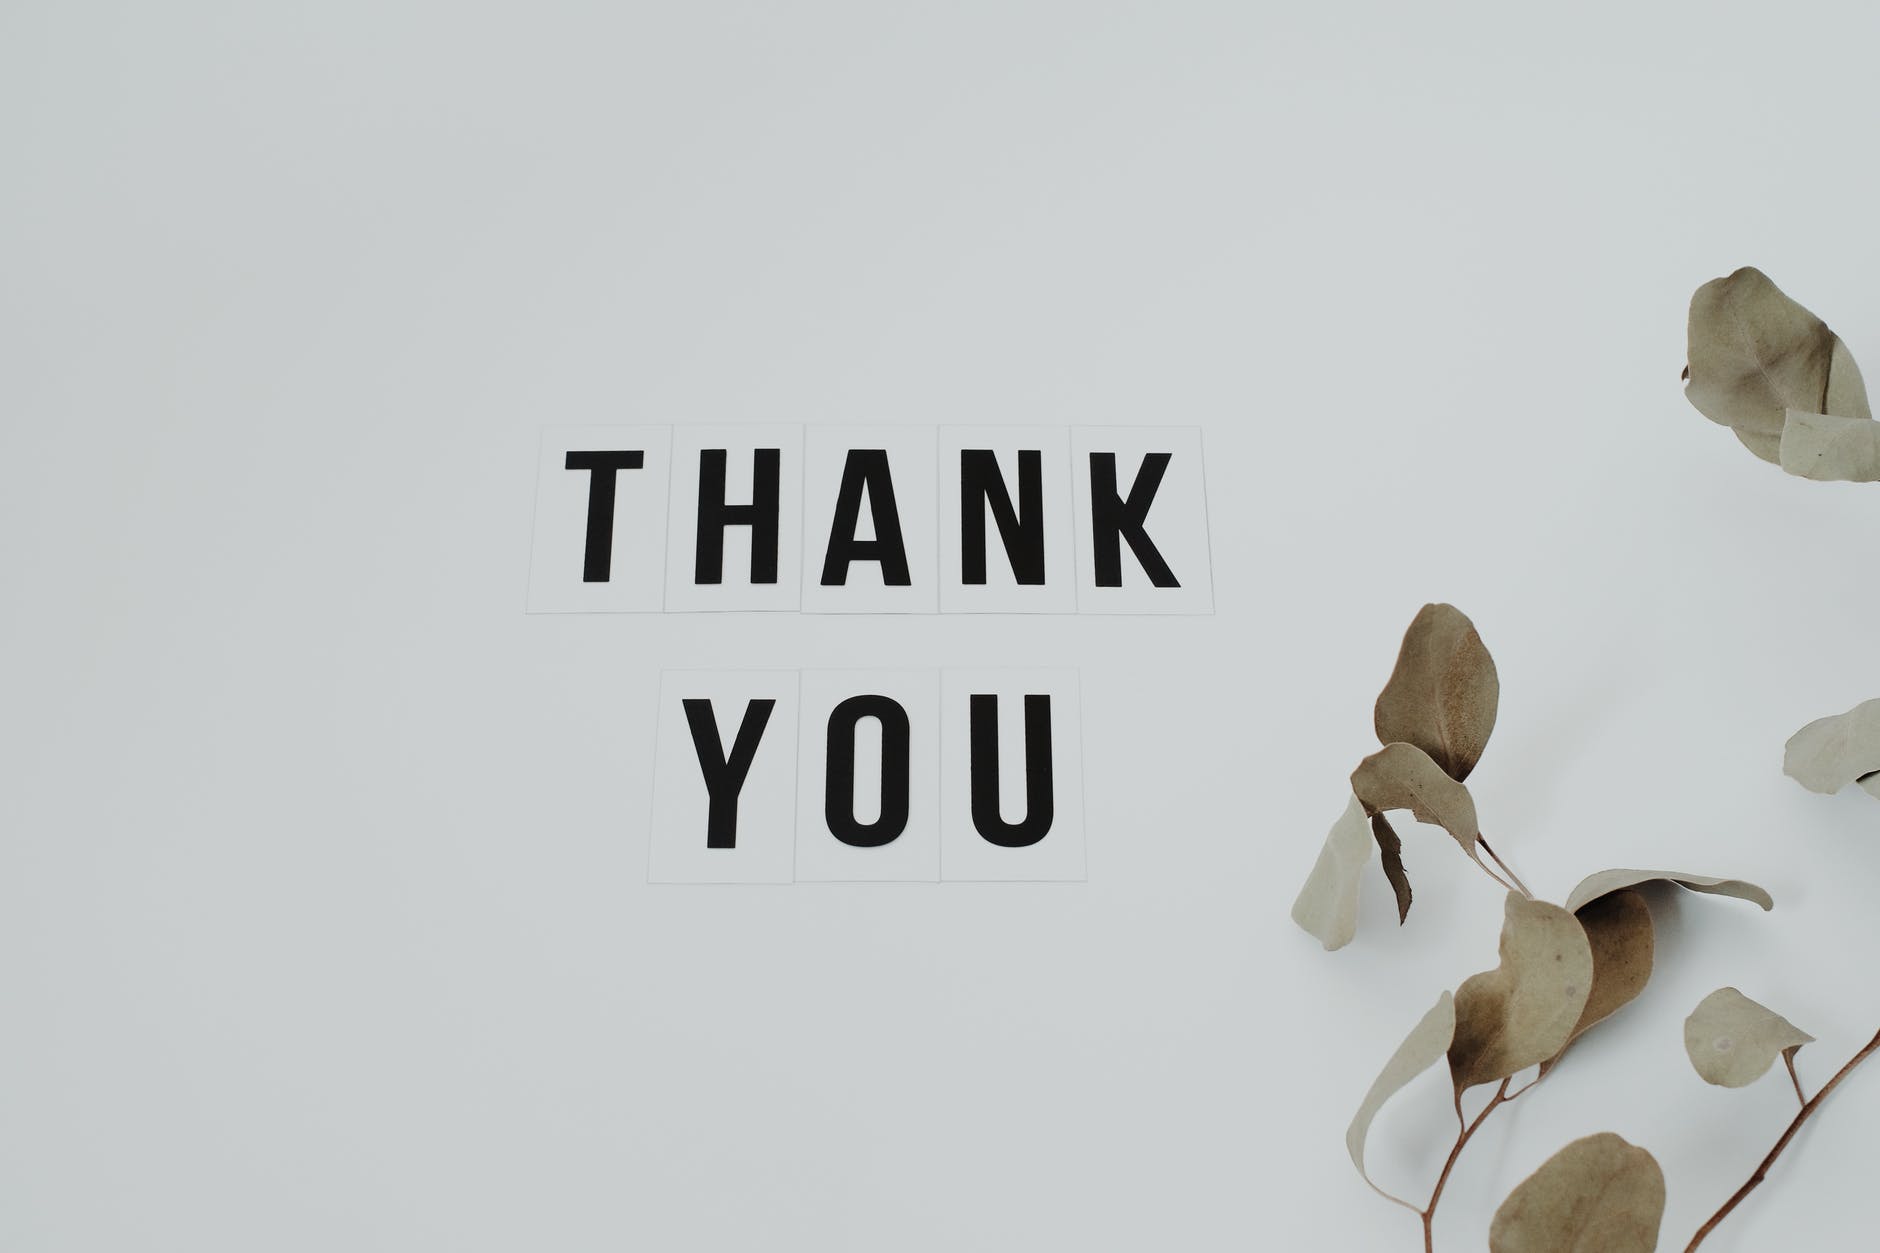 Large font with the words "Thank You".